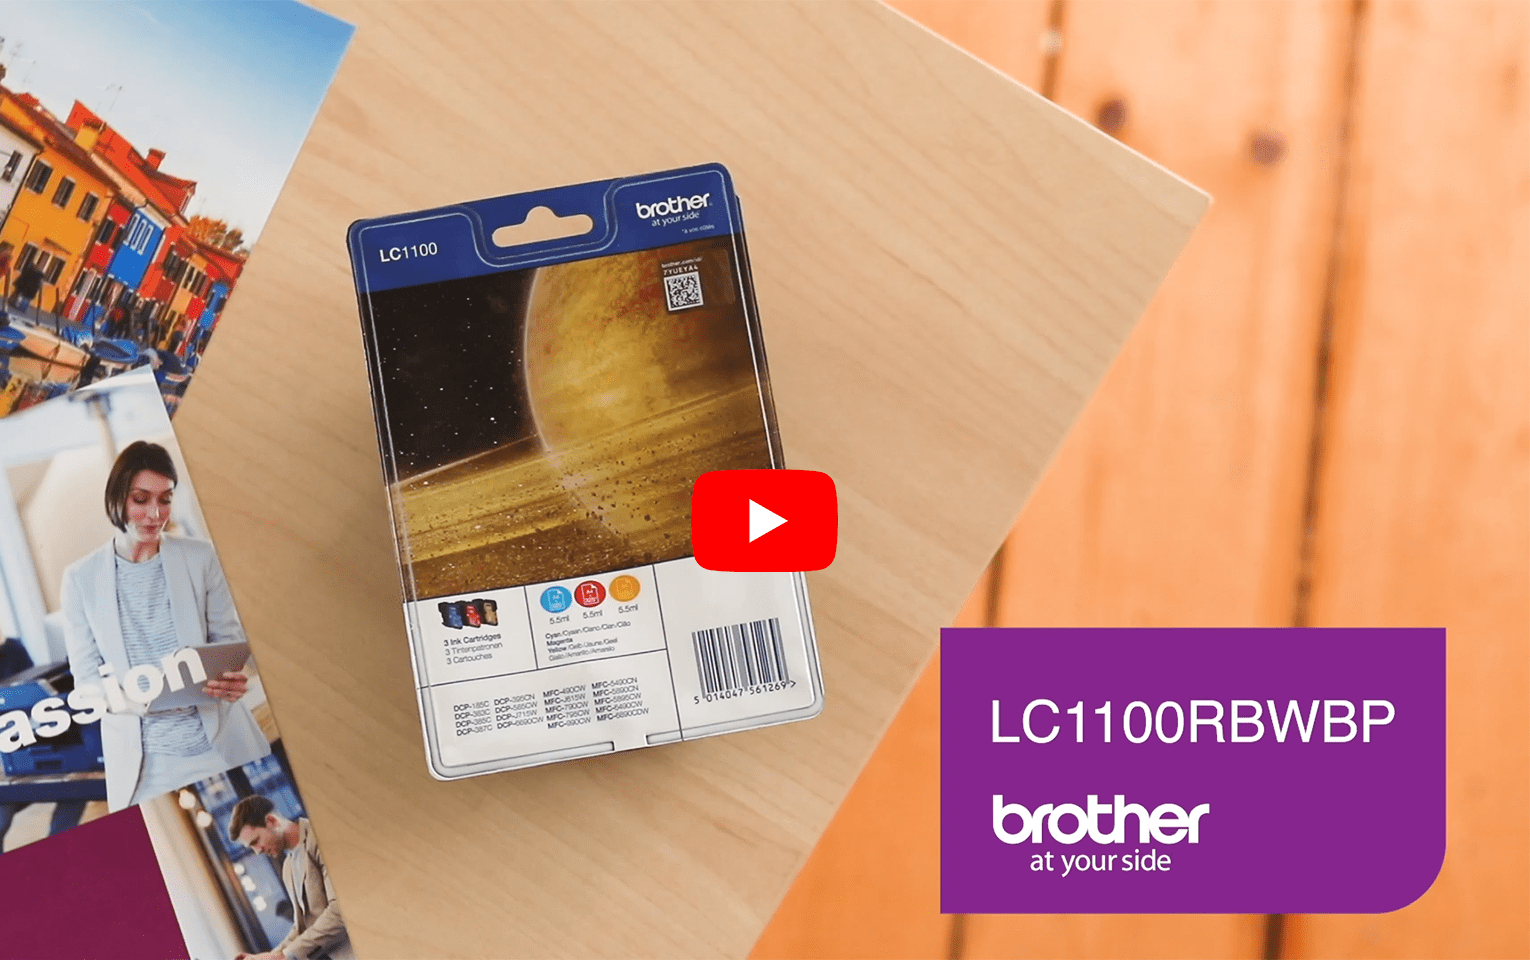 Genuine Brother LC1100RBWBP Ink Cartridge Rainbow Blister Pack 5